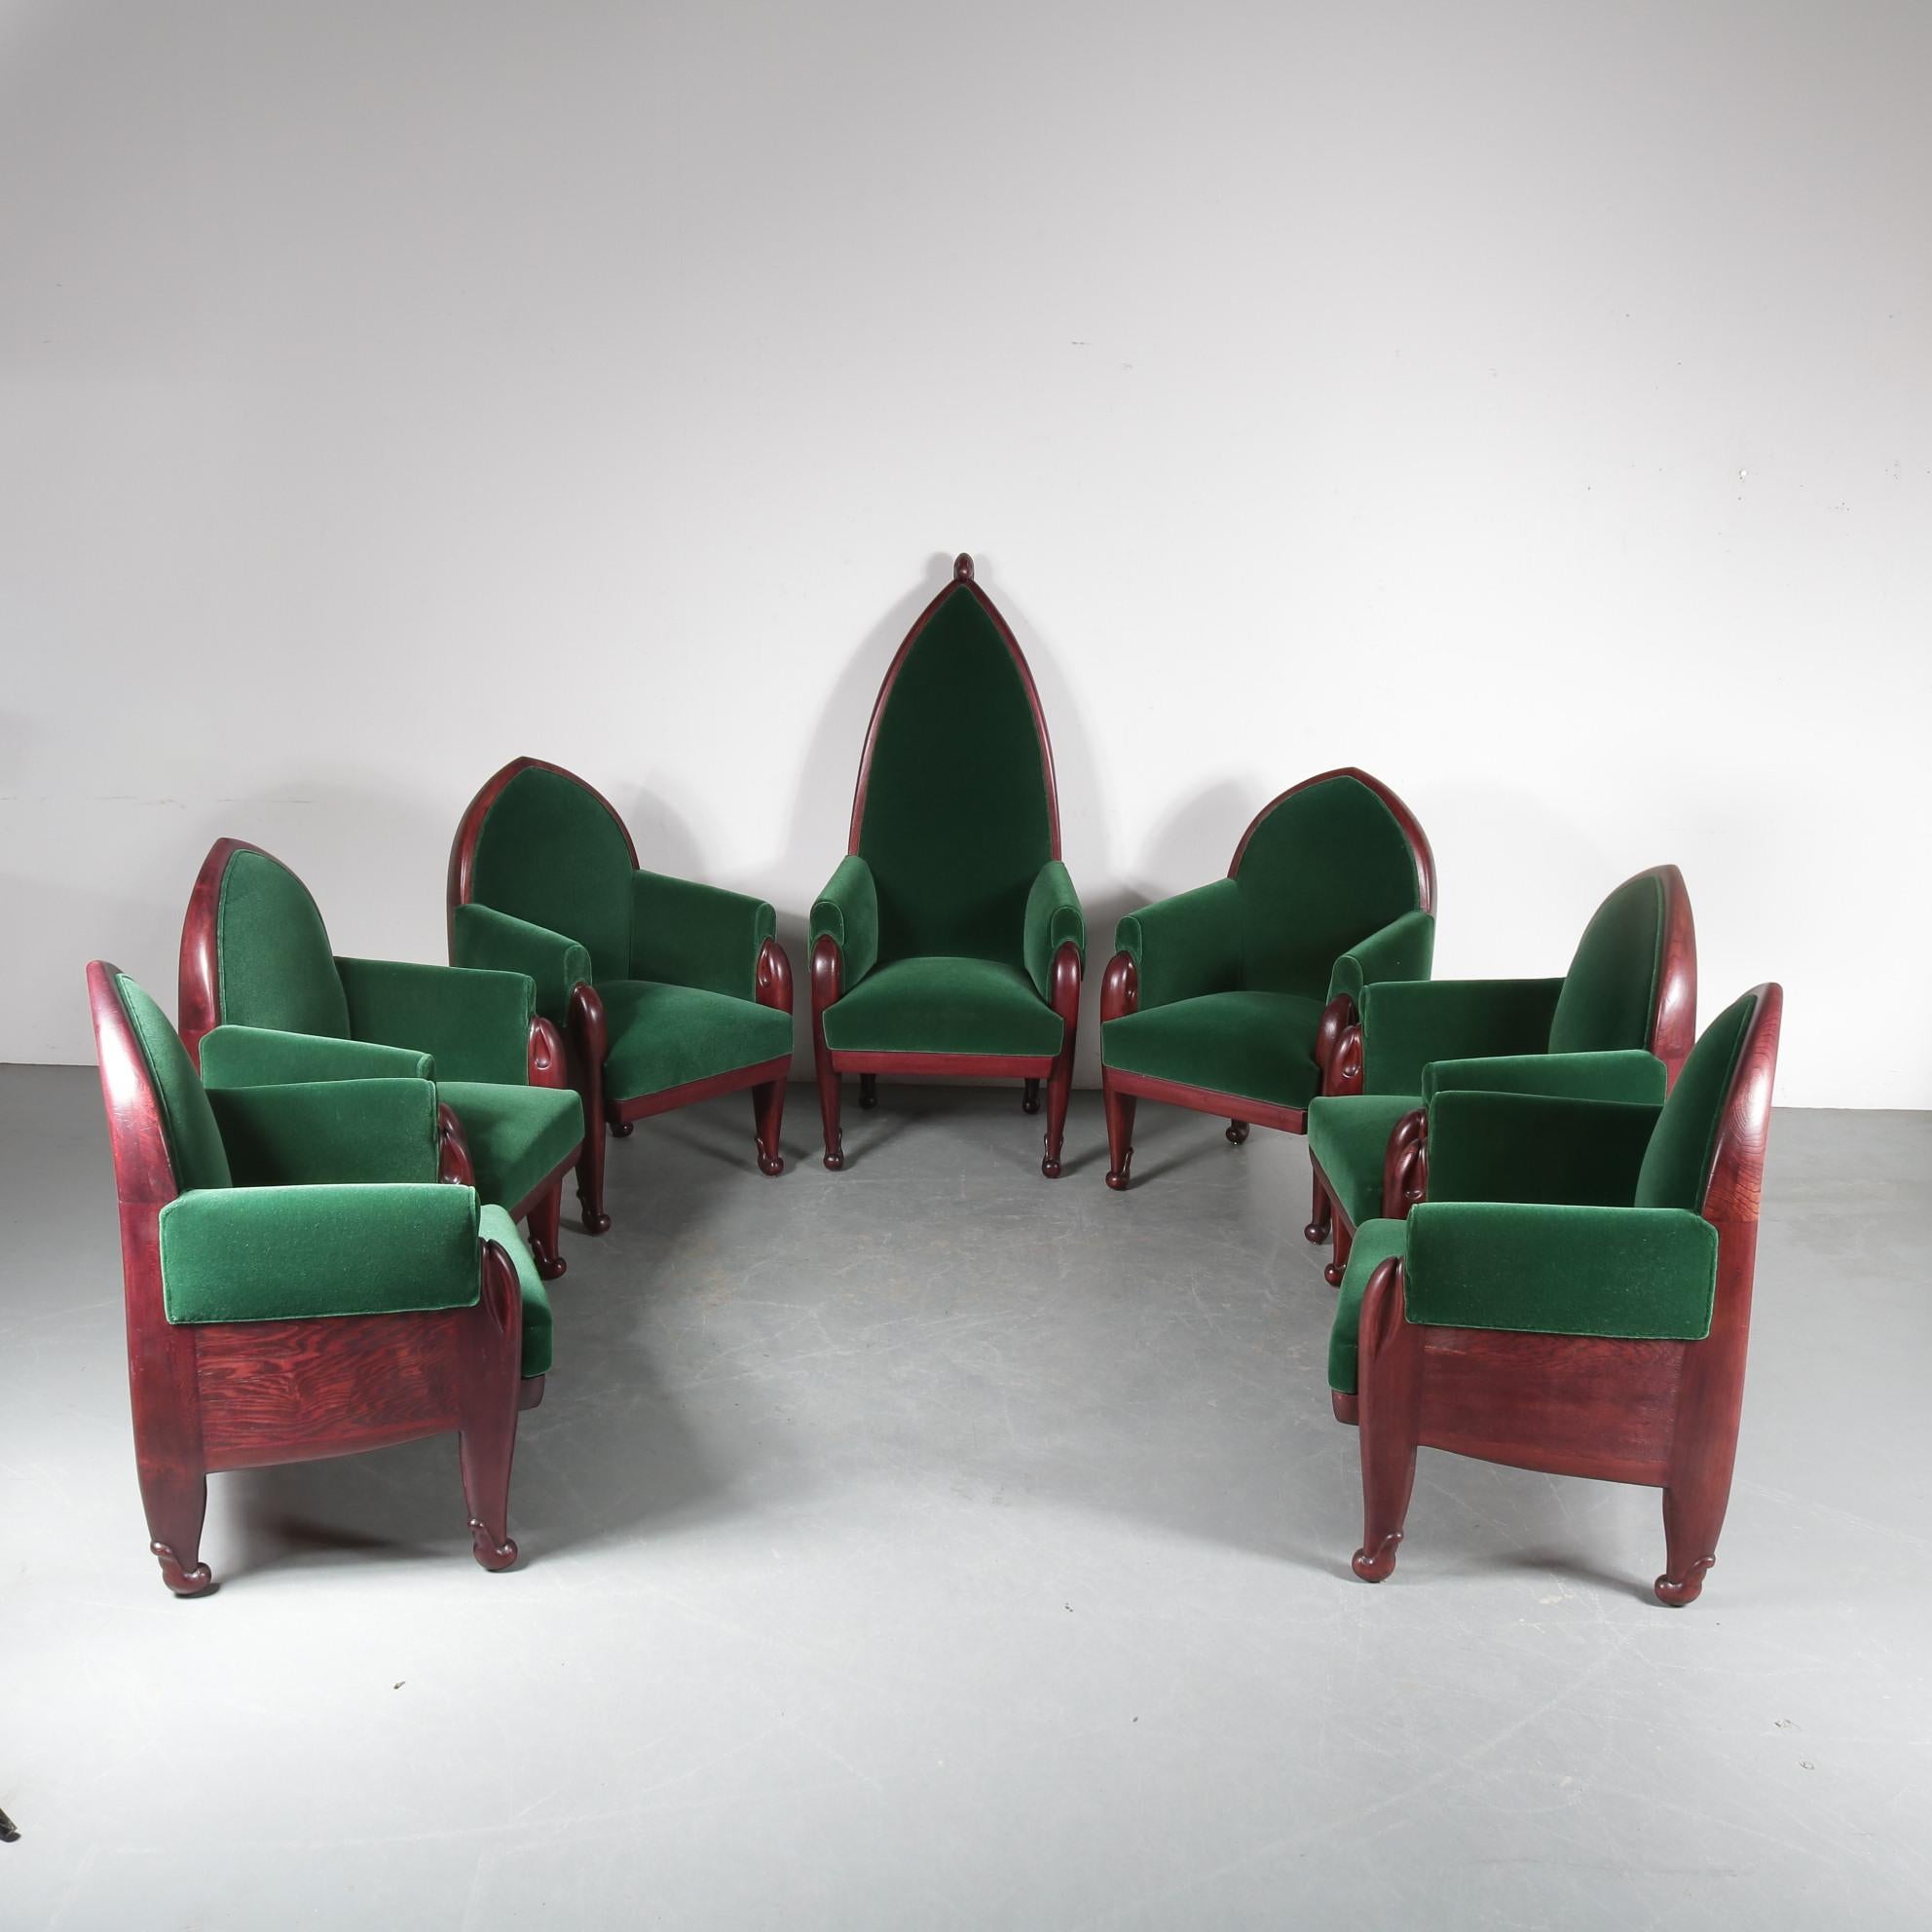 An impressive set of seven conference chairs in Amsterdamse School style, designed by Cornelis Blaauw for the School of Applied Arts in Haarlem around 1920.

They are made of beautiful quality wood with a warm brown finish. The chairs have a